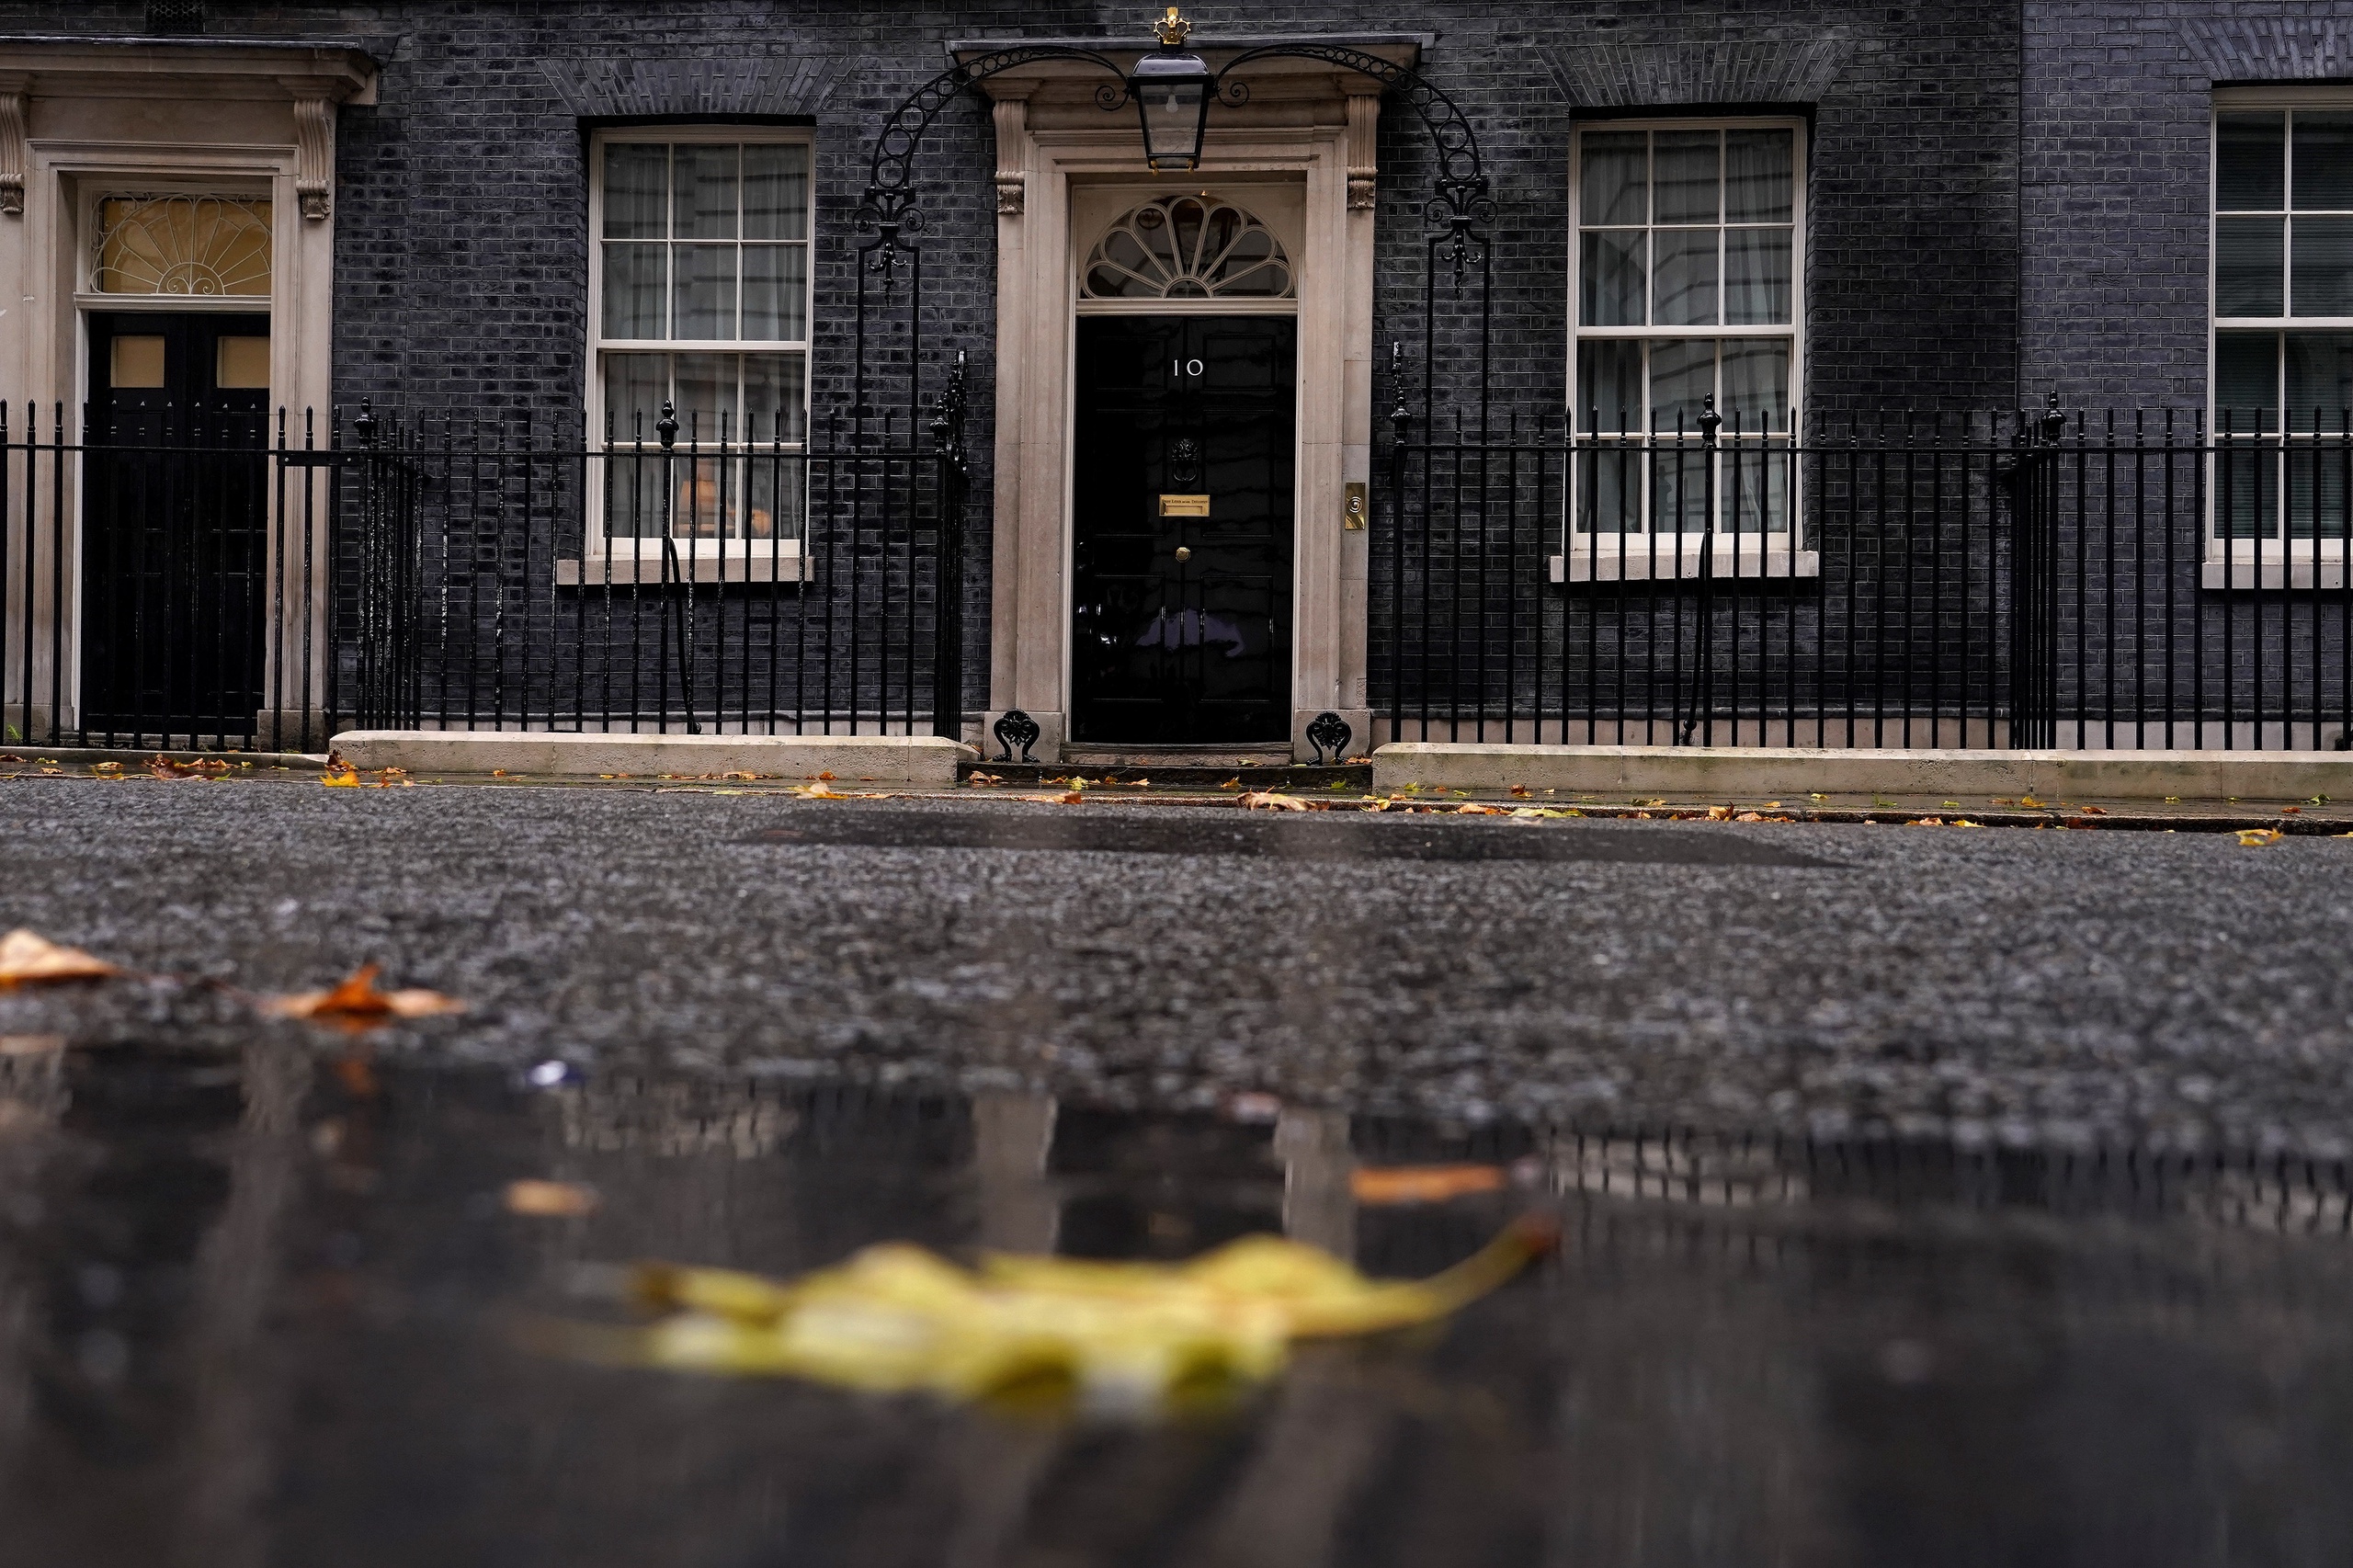 Rain and fallen leaves create an autumn atmosphere at 10 Downing Street in London, Thursday, Oct. 20, 2022. U.K. Prime Minister Liz Truss is hanging on to power by a thread after a senior minister quit her government and a vote in the House of Commons descended into chaos and acrimony. (AP Photo/Alberto Pezzali)